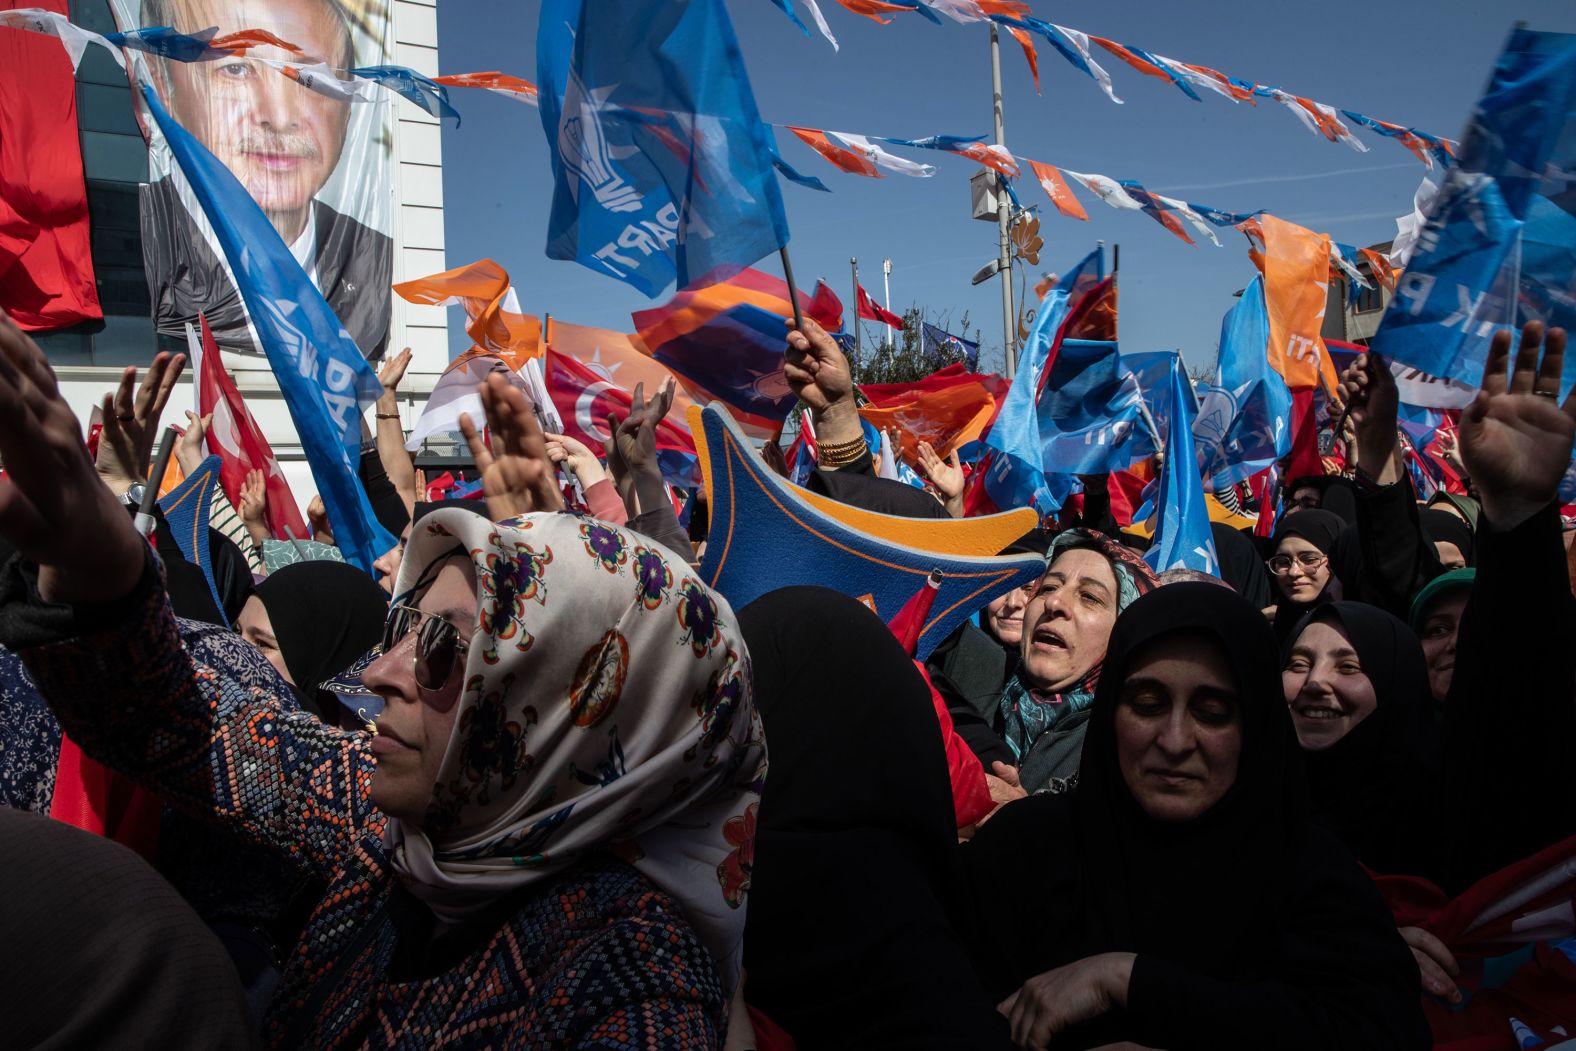 Supporters of Turkey's ruling Justice and Development (AK) Party wave flags and cheer during a rally in Istanbul on Friday, March 29. <a href="index.php?page=&url=https%3A%2F%2Fwww.cnn.com%2F2024%2F04%2F01%2Fmiddleeast%2Fturkey-local-election-blow-erdogan-opposition-mime-intl%2Findex.html" target="_blank">Turkey held nationwide elections on Sunday</a> for city mayors, district mayors, and other local officials who will serve for the next five years. The AK Party lost the popular vote for the first time since it started running for elections in 2002, and it lost regions that had previously been considered AK Party strongholds.